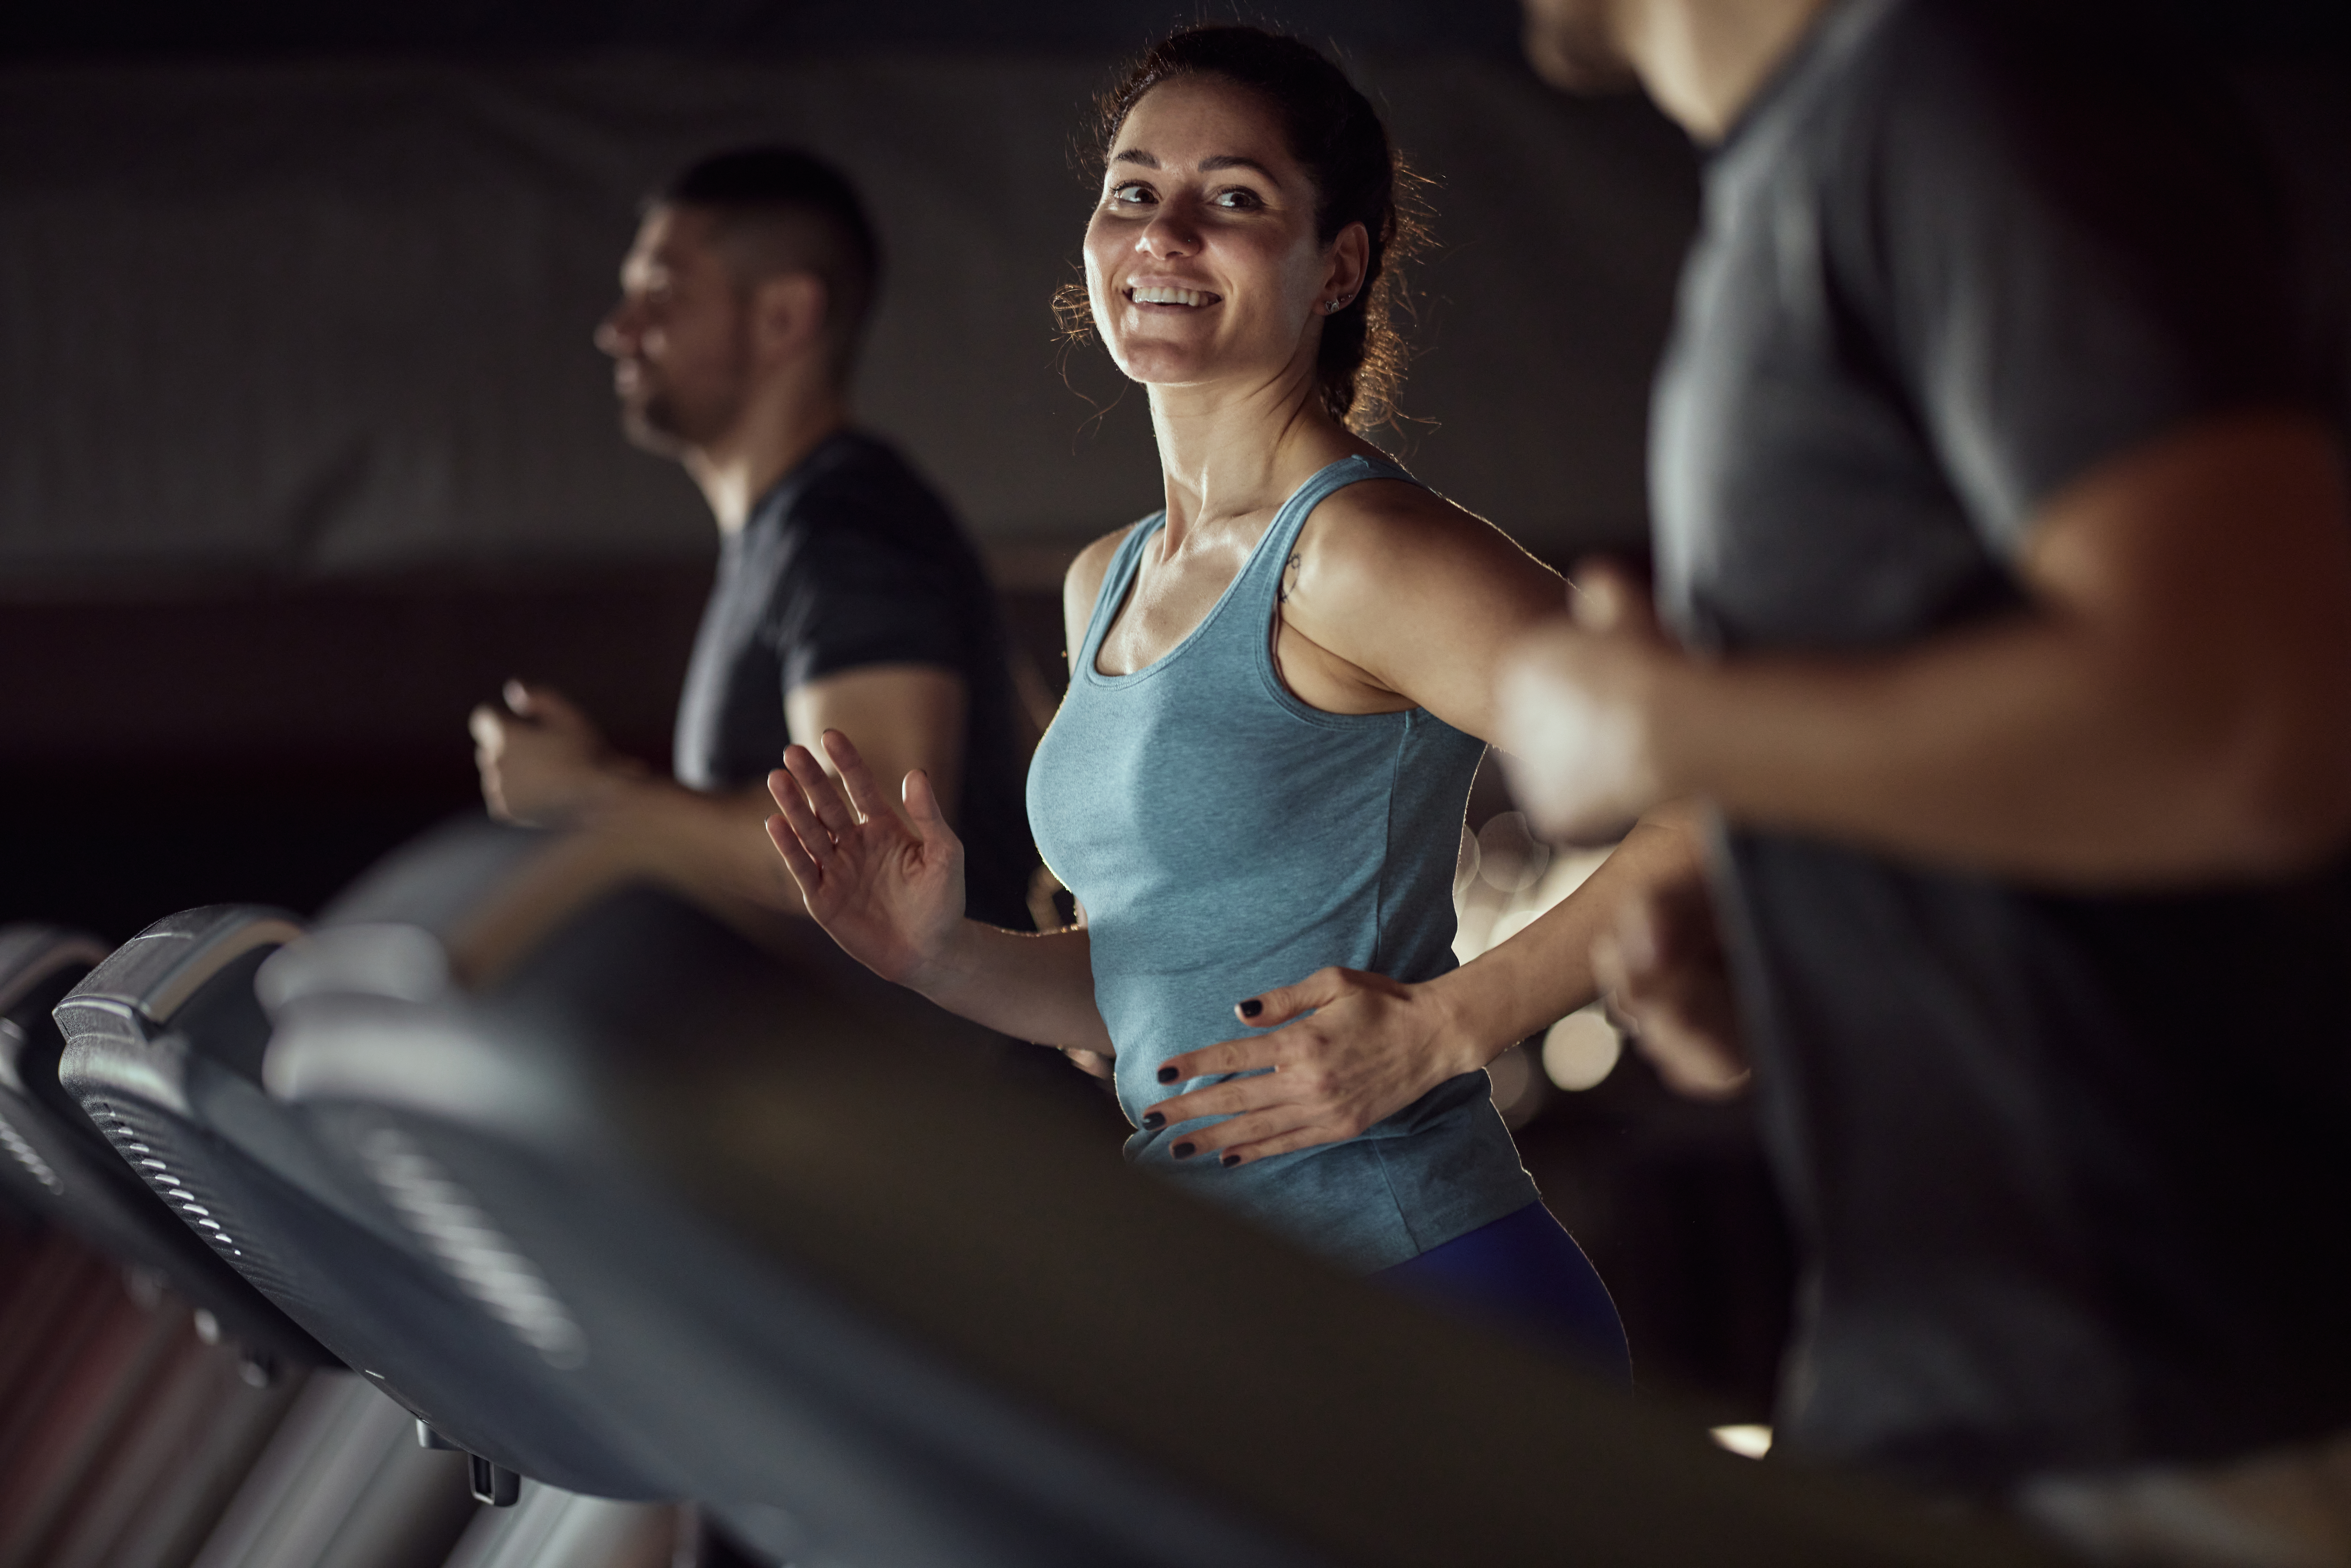 We helped a large Danish fitness chain secure a successful takeover and merger integration of a Swiss-based fitness chain